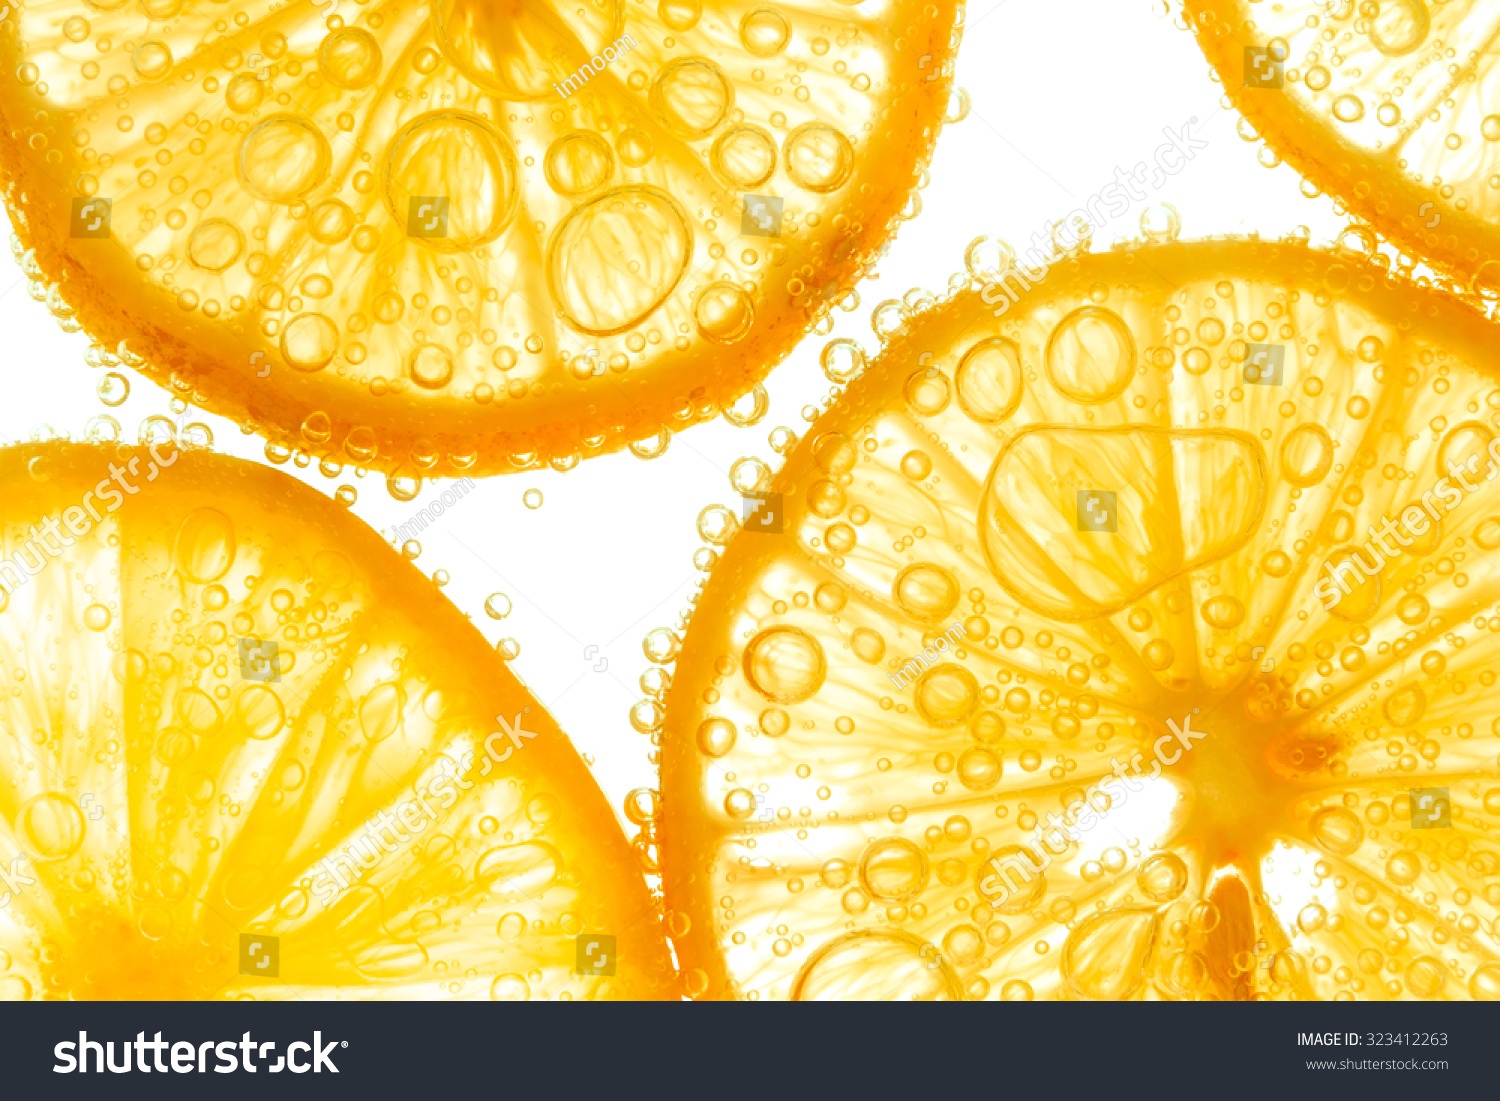 Fresh orange slice in water with bubbles on white background #323412263